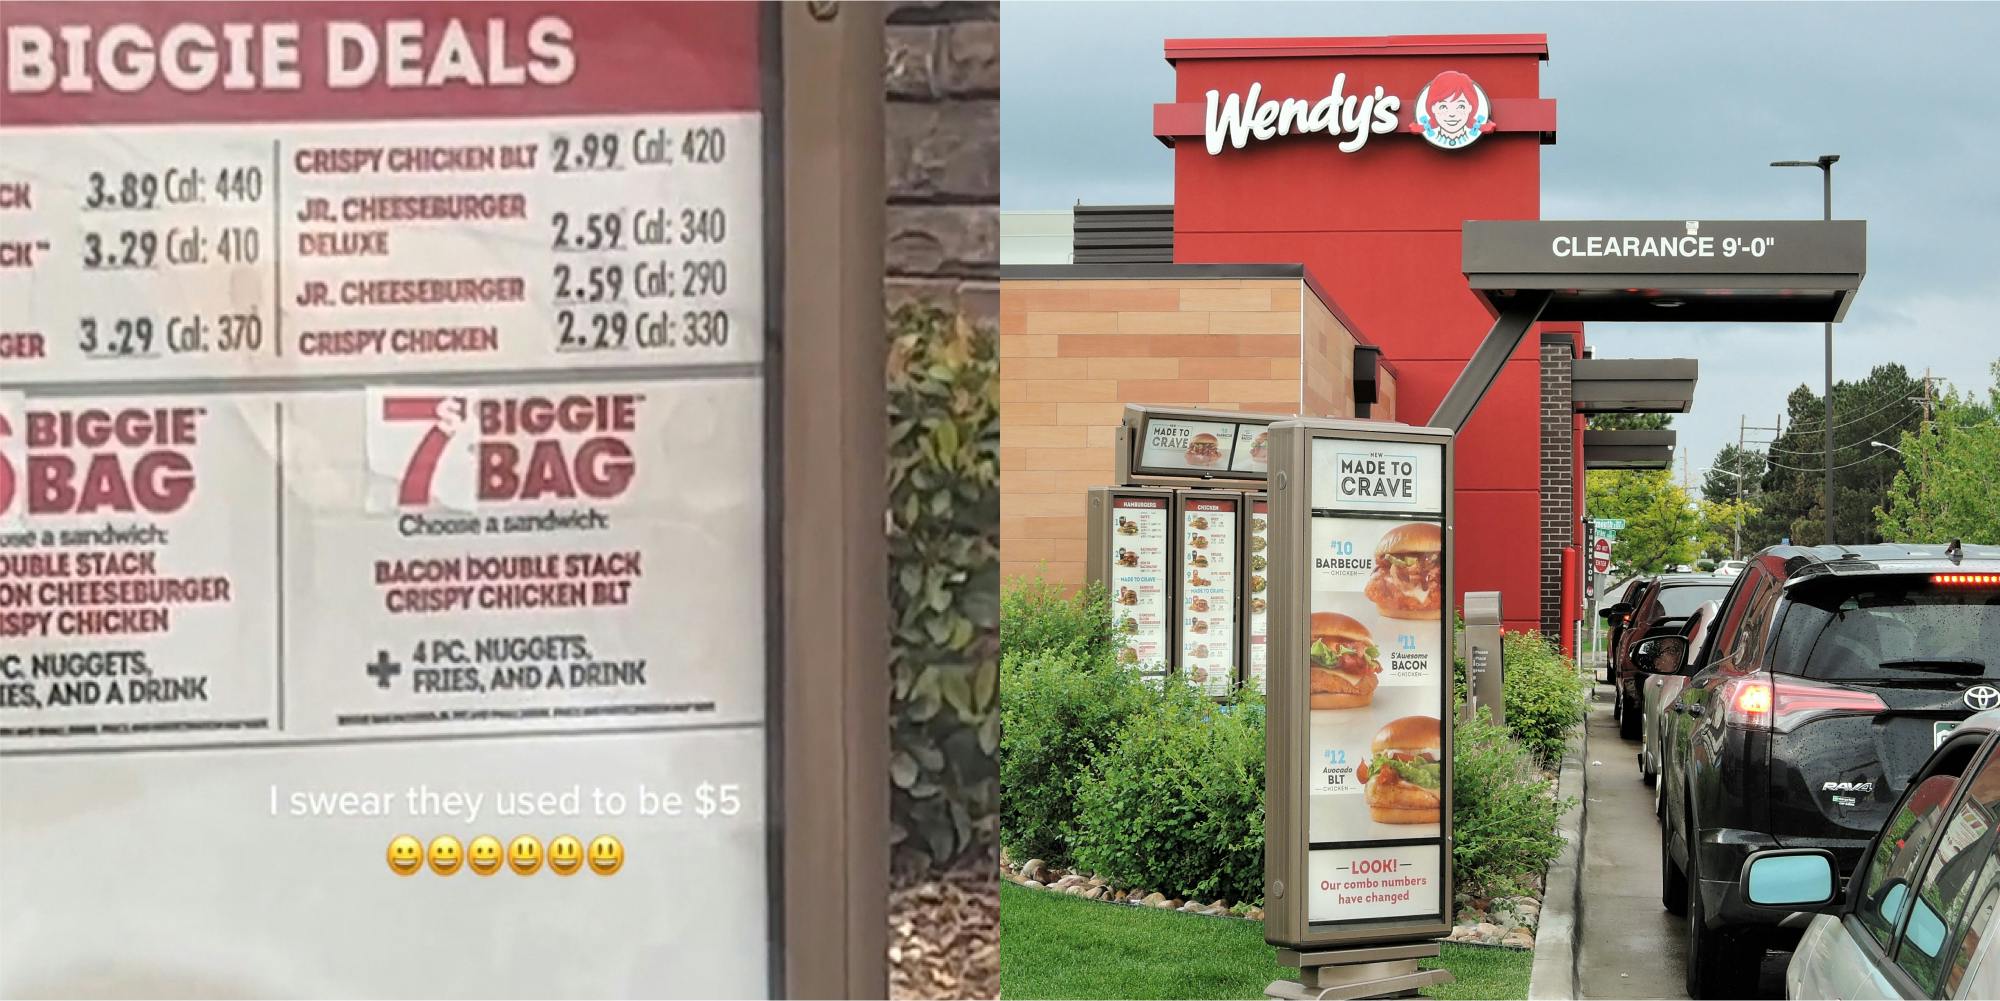 Wendy's drive thru menu with $7 Biggie Bag on sign with caption "I swear they used to be $5" (l) Wendy's drive thru with sign (c)